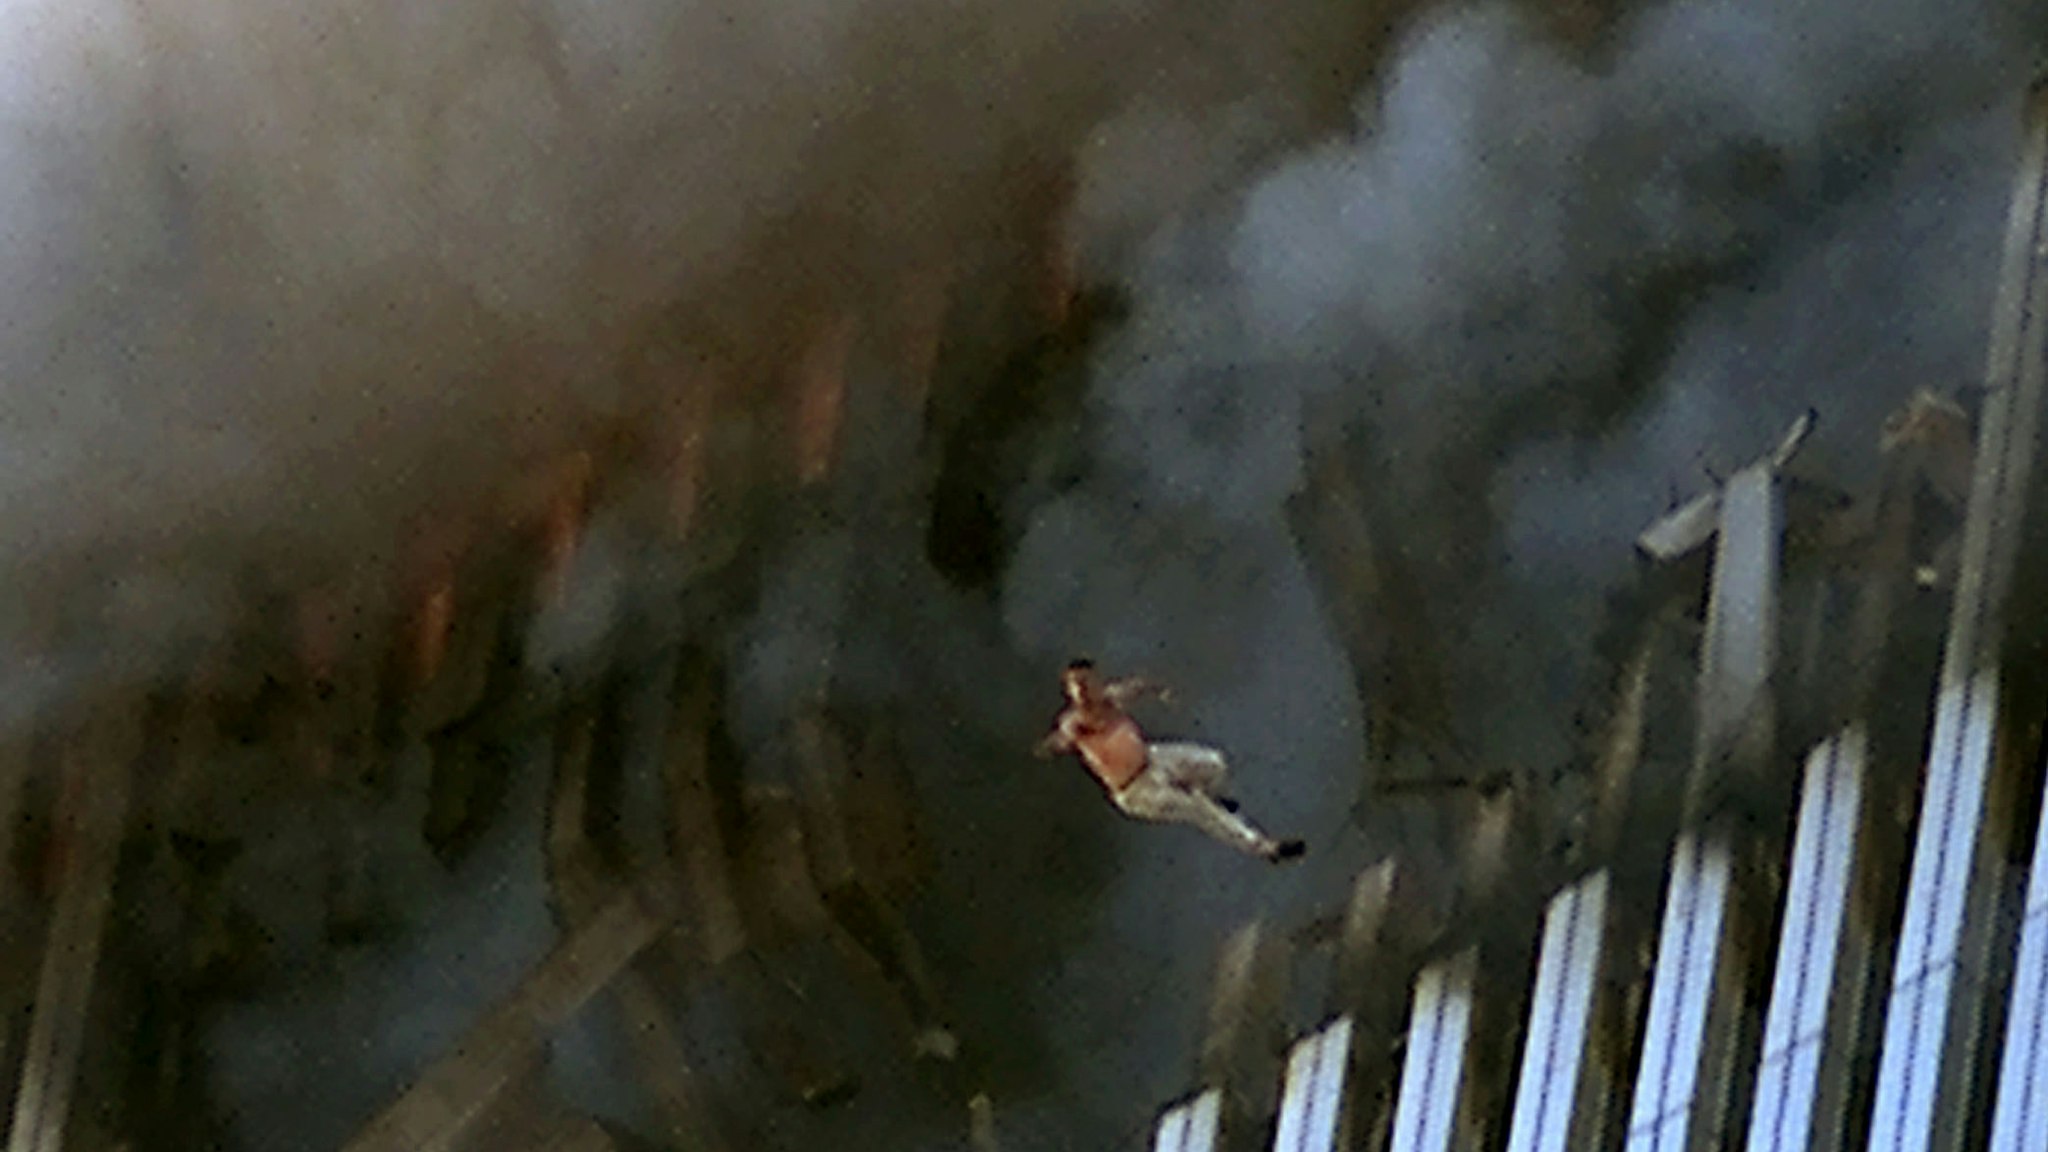 A man leaps to his death from a fire and smoke filled Tower One of the World Trade Center September 11, 2001 in New York City after terrorists crashed two hijacked passenger planes into the twin towers.